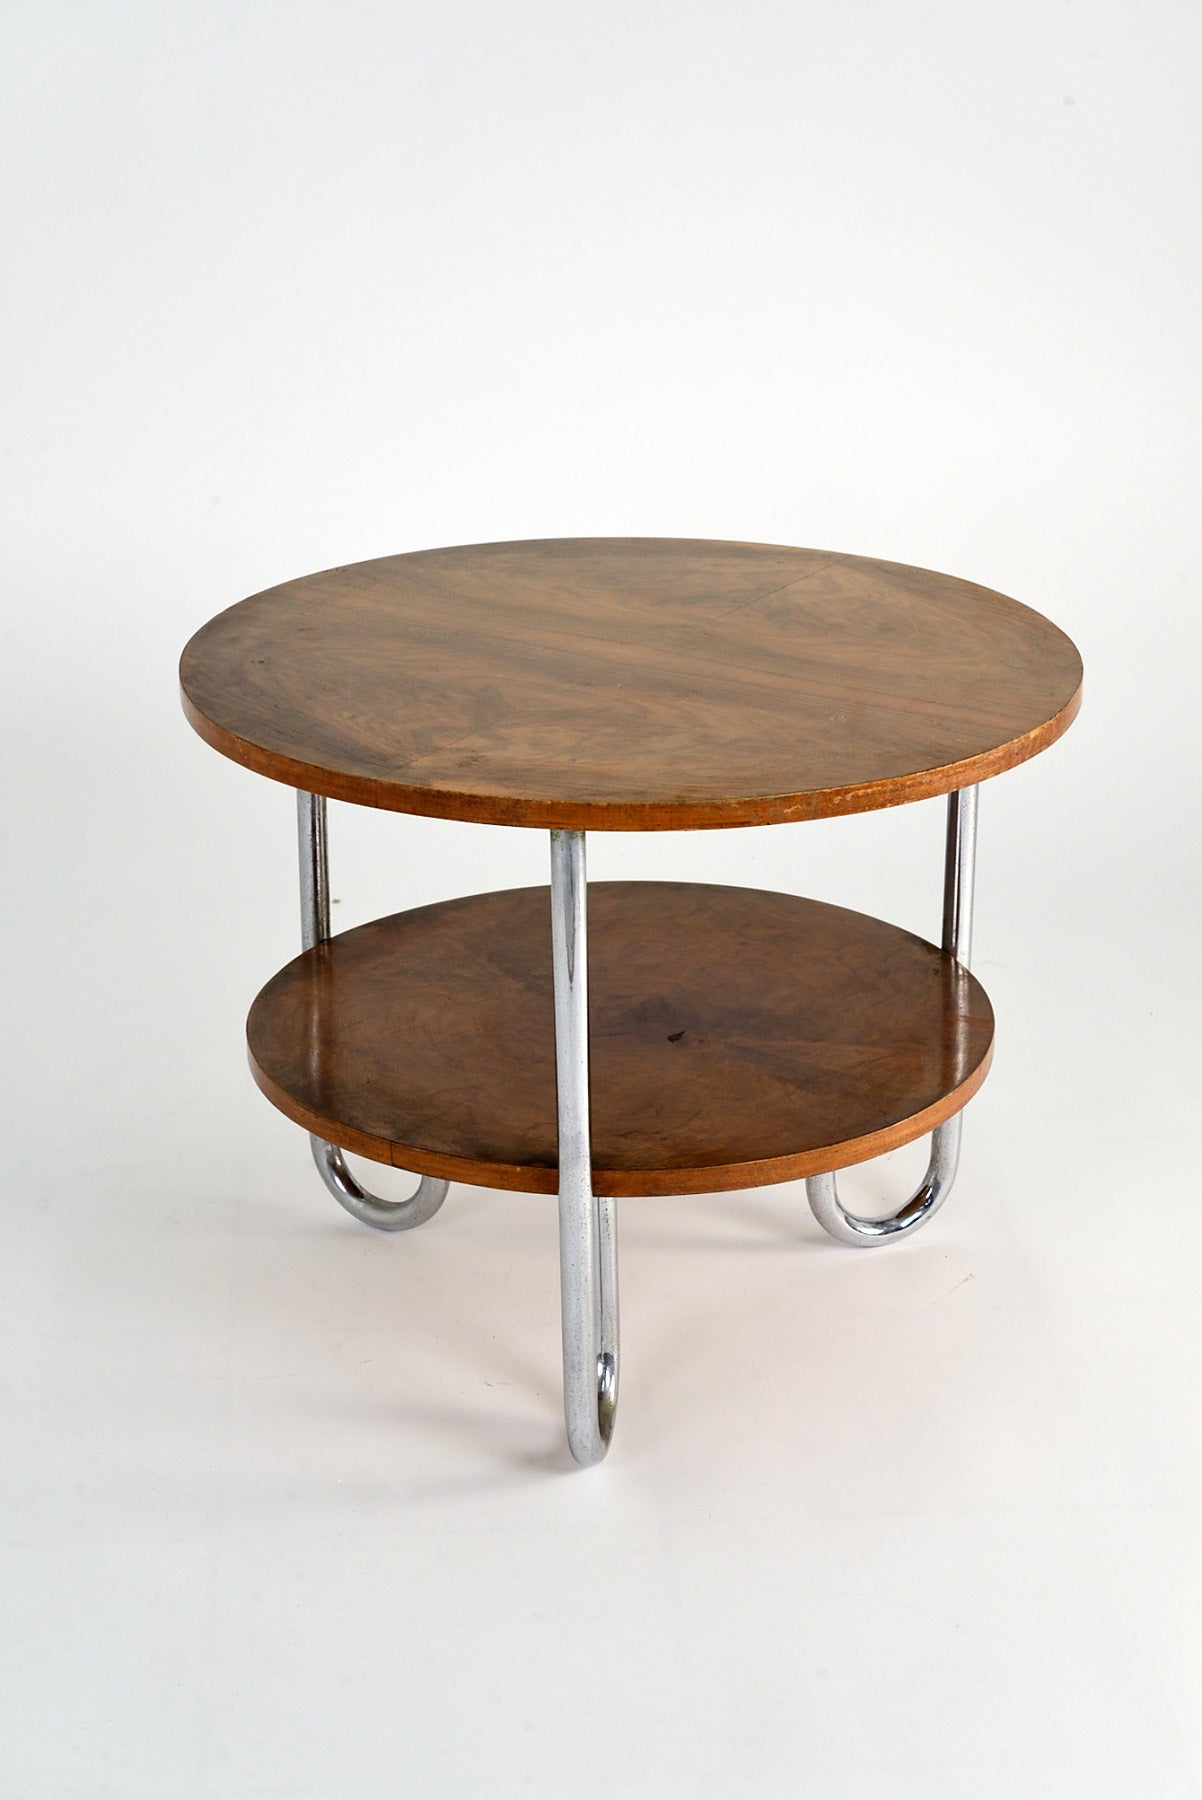 Rationalist coffee table manufactured by Columbus, Milan, in the '30s. Chrome plated tubular metal legs, wooden double top.